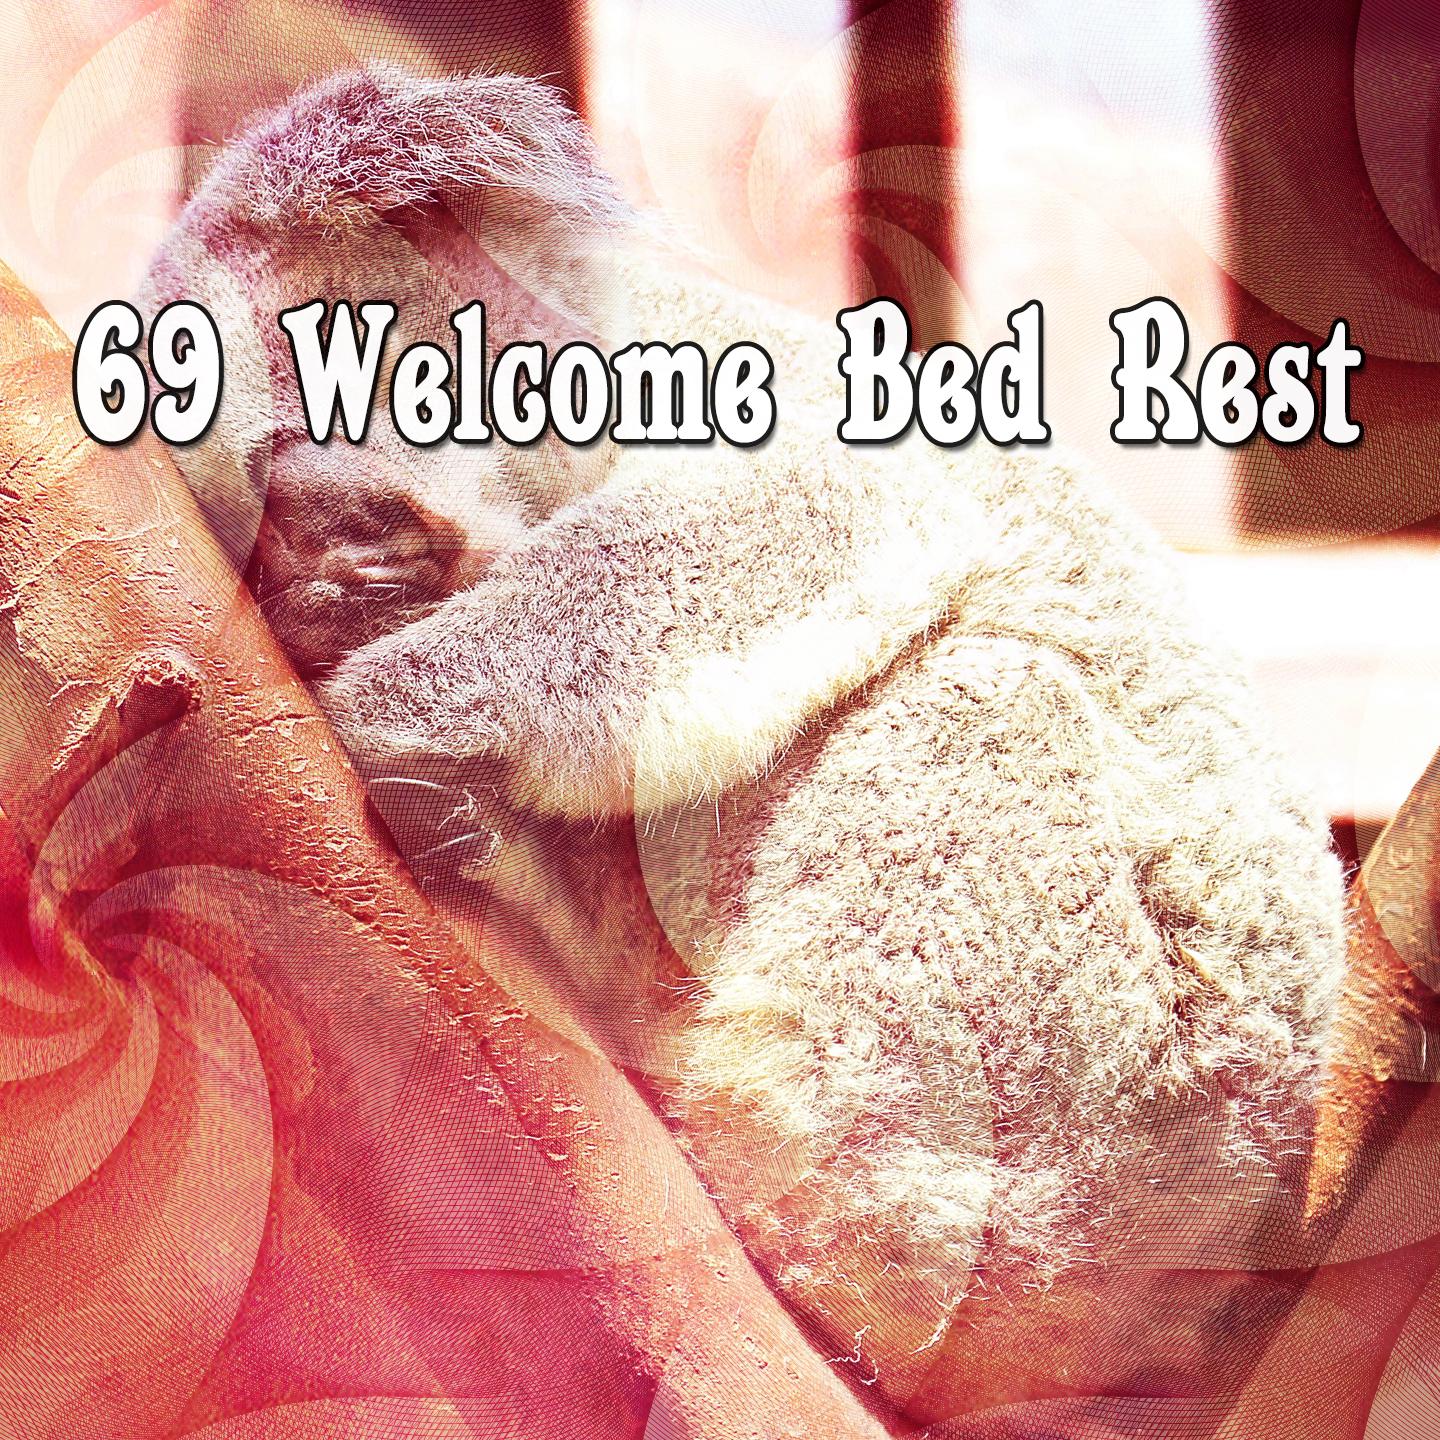 69 Welcome Bed Rest